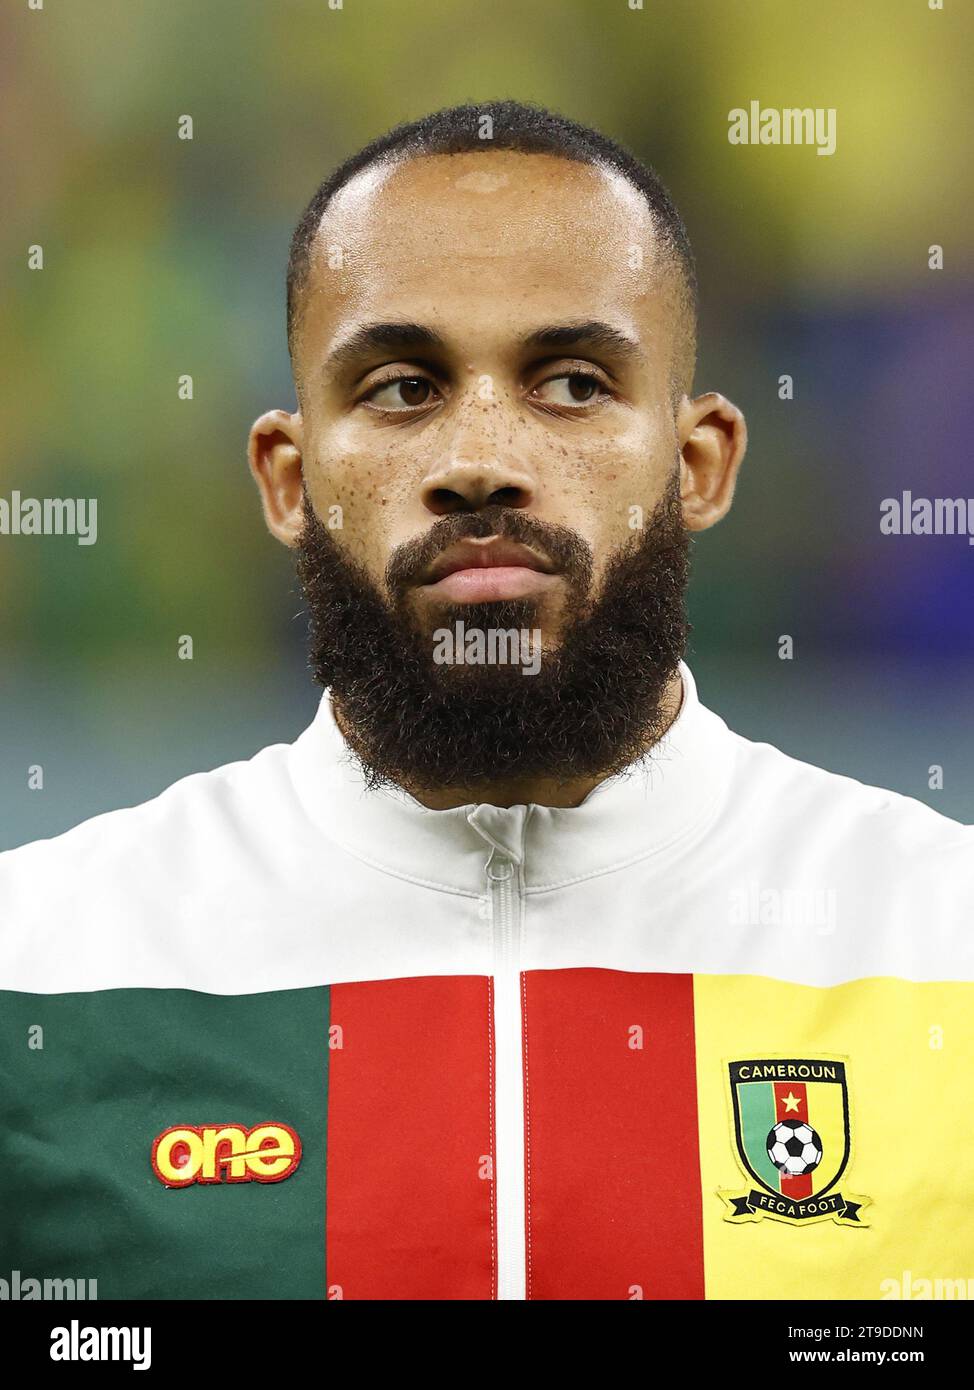 LUSAIL CITY - Bryan Mbeumo of Cameroon during the FIFA World Cup Qatar 2022 group G match between Cameroon and Brazil at Lusail Stadium on December 2, 2022 in Lusail City, Qatar. ANP | Hollandse Hoogte | MAURICE VAN STEEN Stock Photo